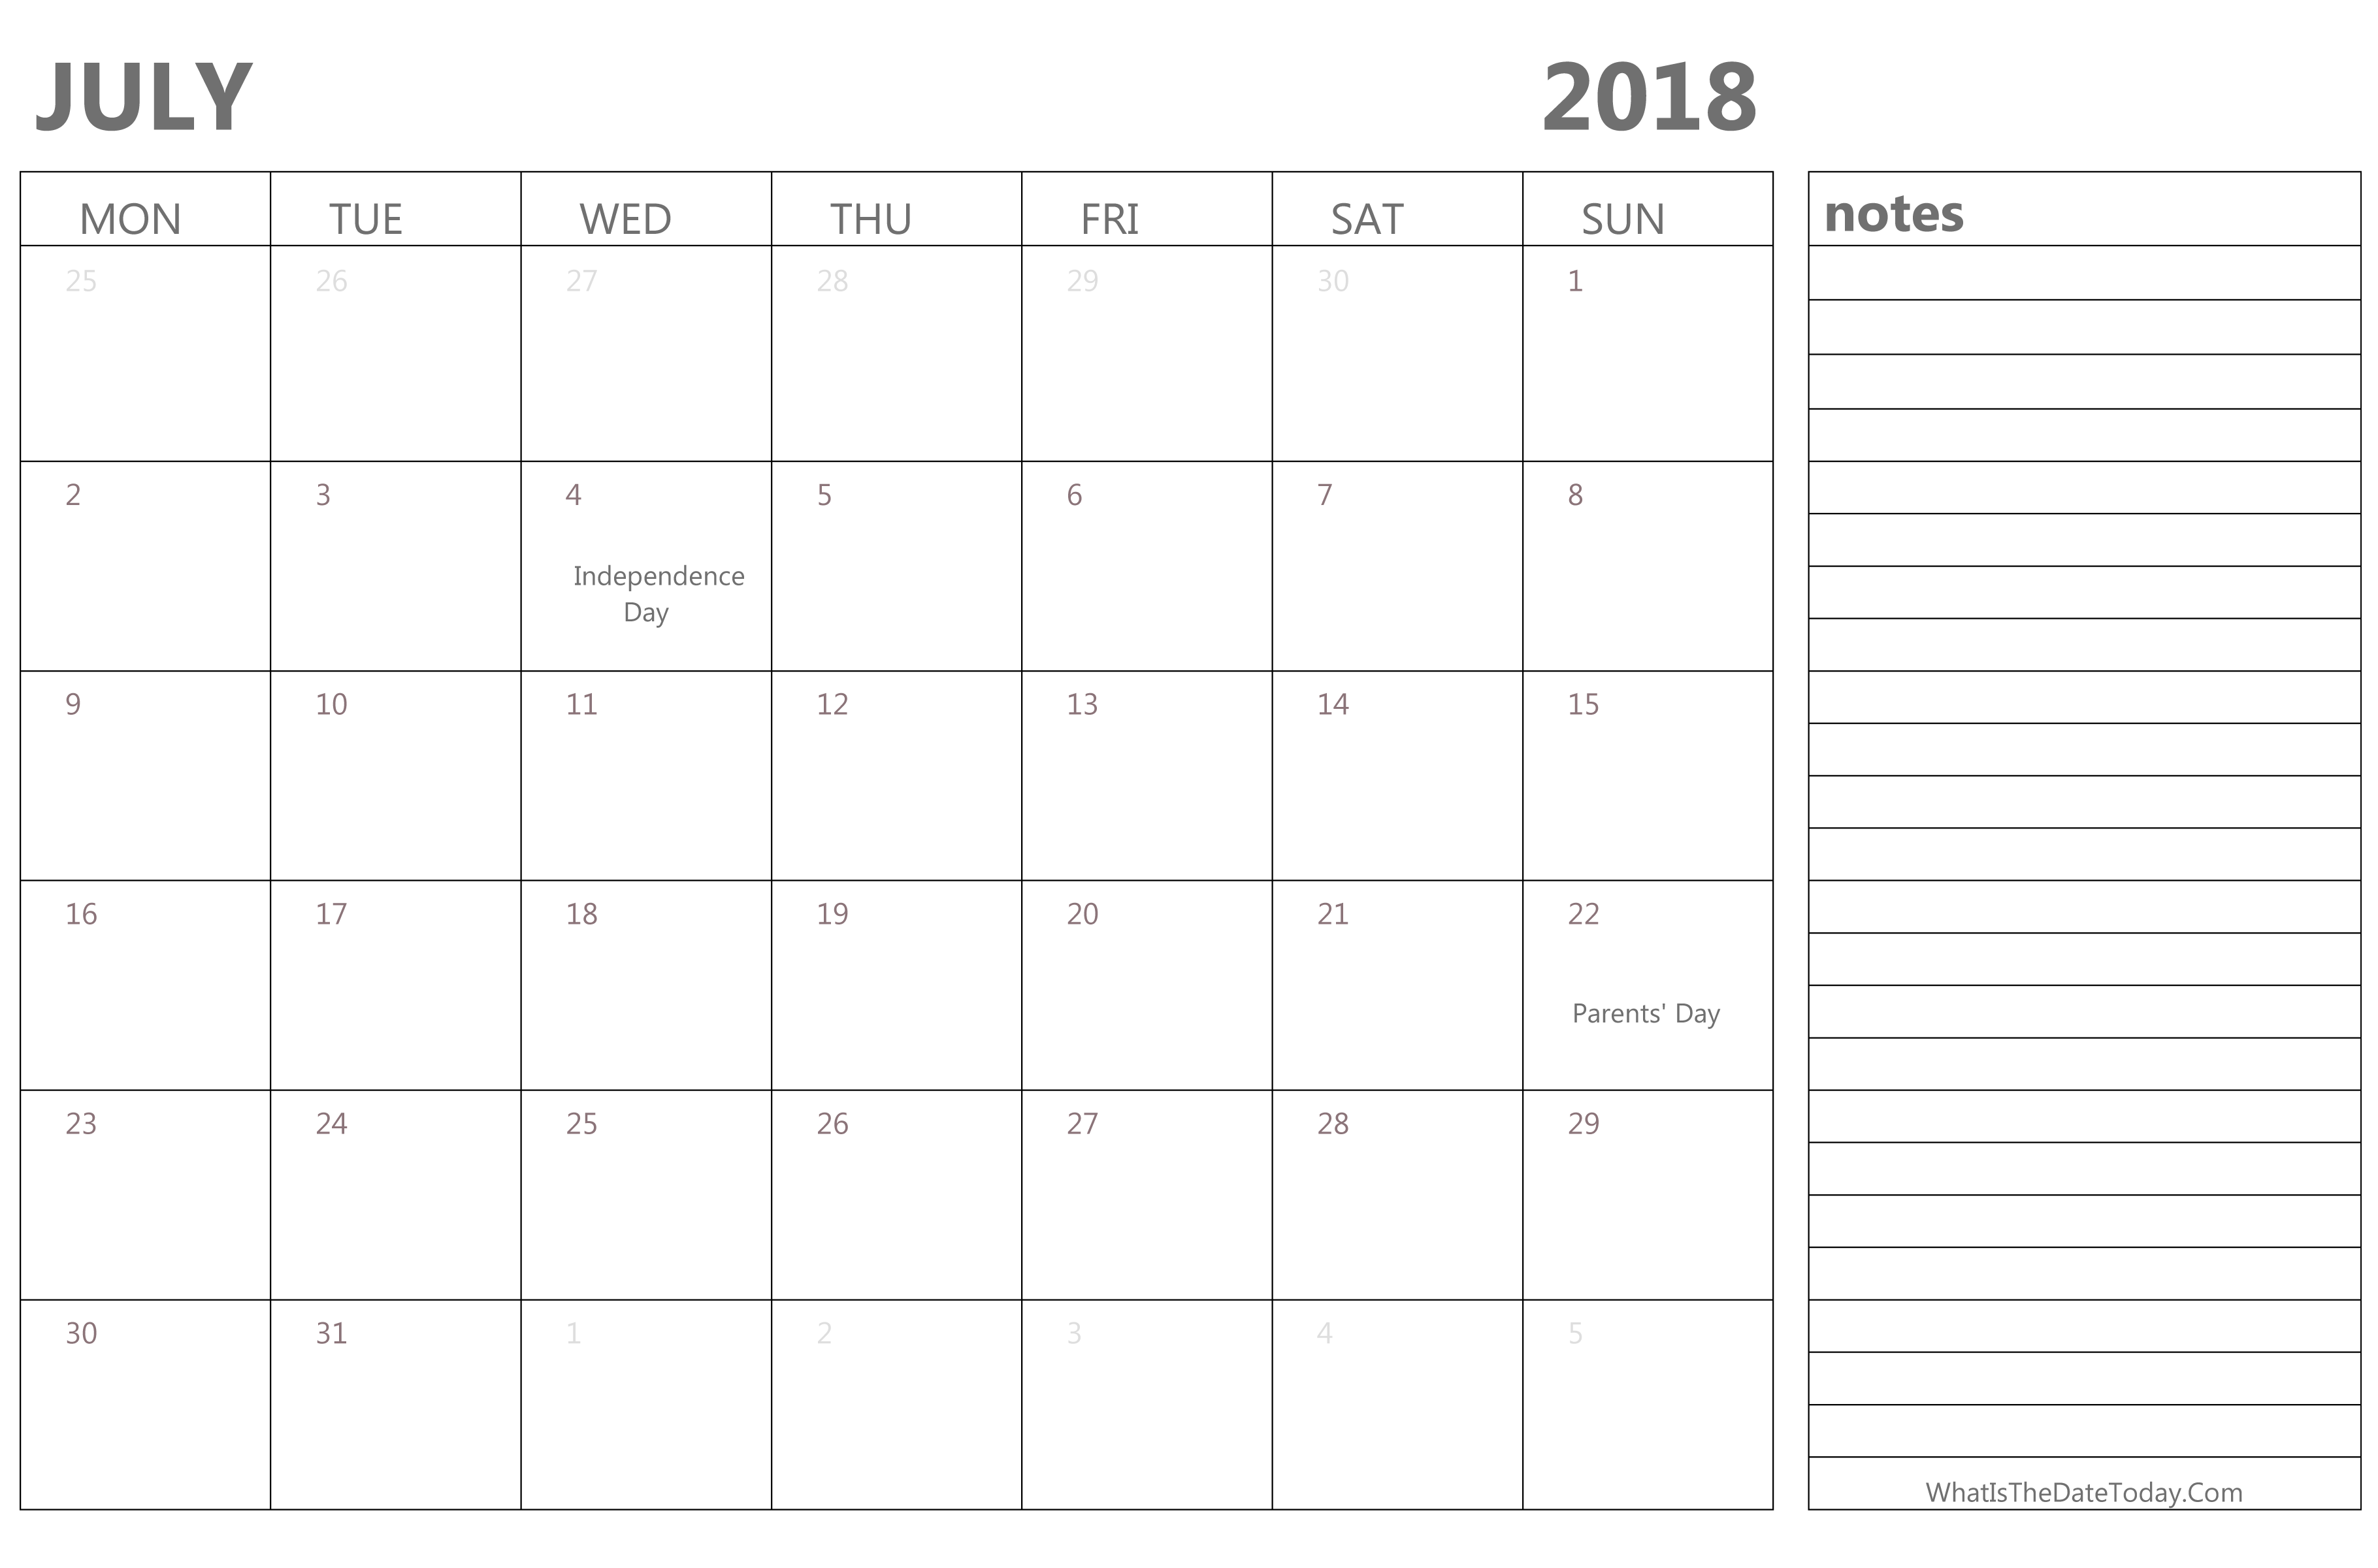 editable-july-2018-calendar-with-holidays-and-notes